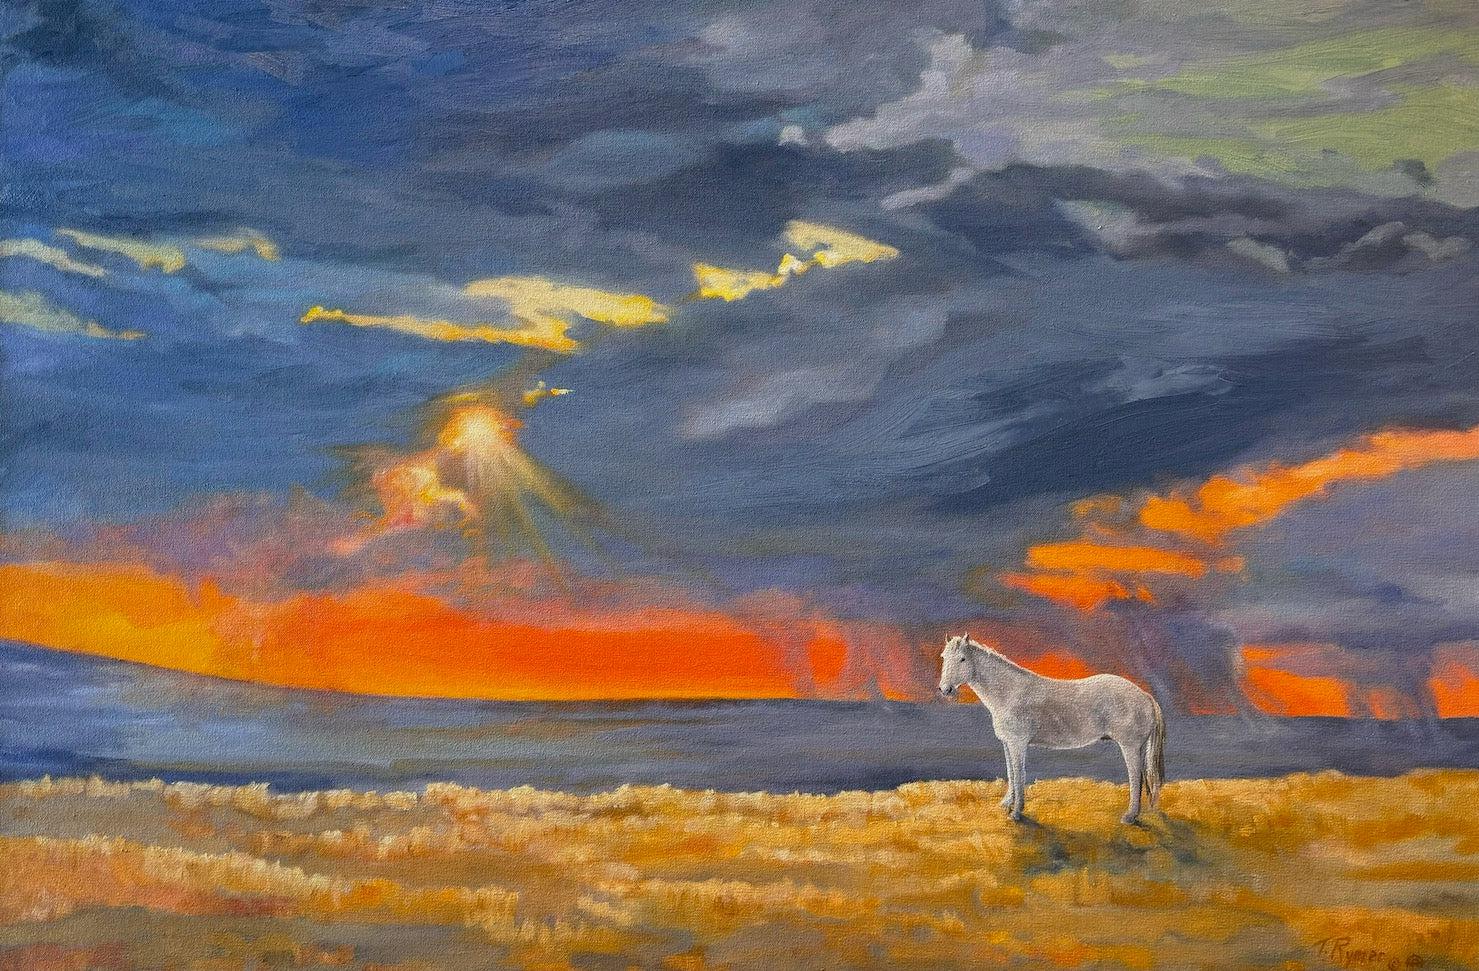 They Saw a White Horse-Painting-Tamara Rymer-Sorrel Sky Gallery